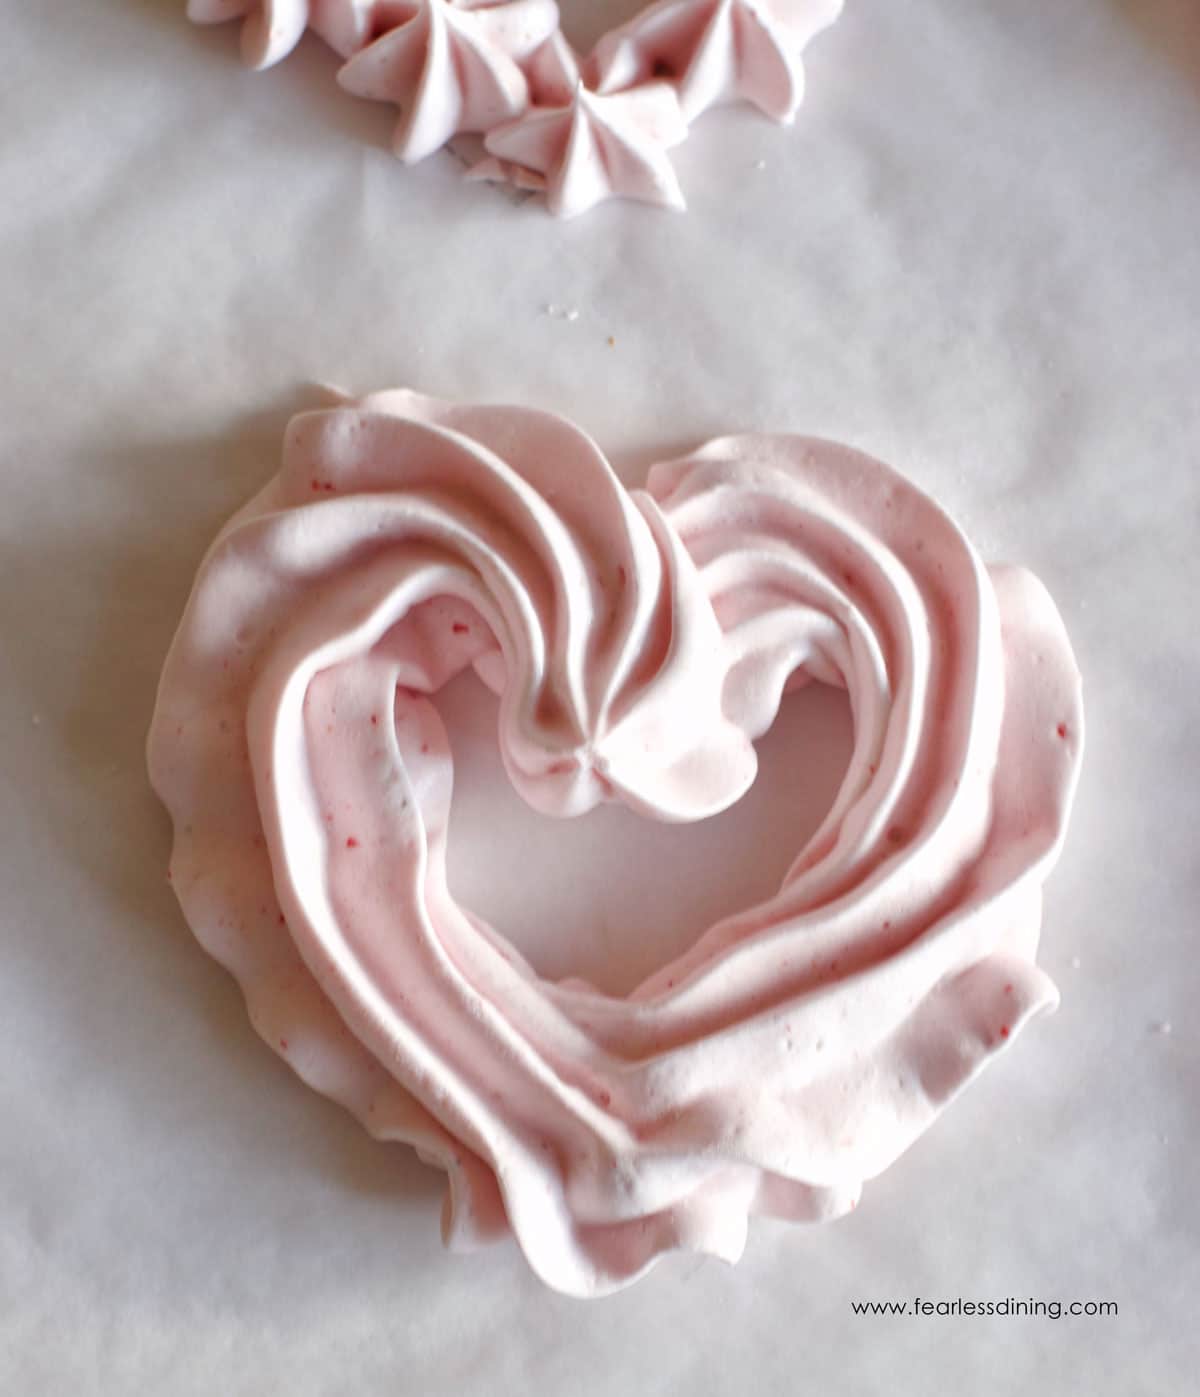 A baked heart shaped meringue cookie on a tray